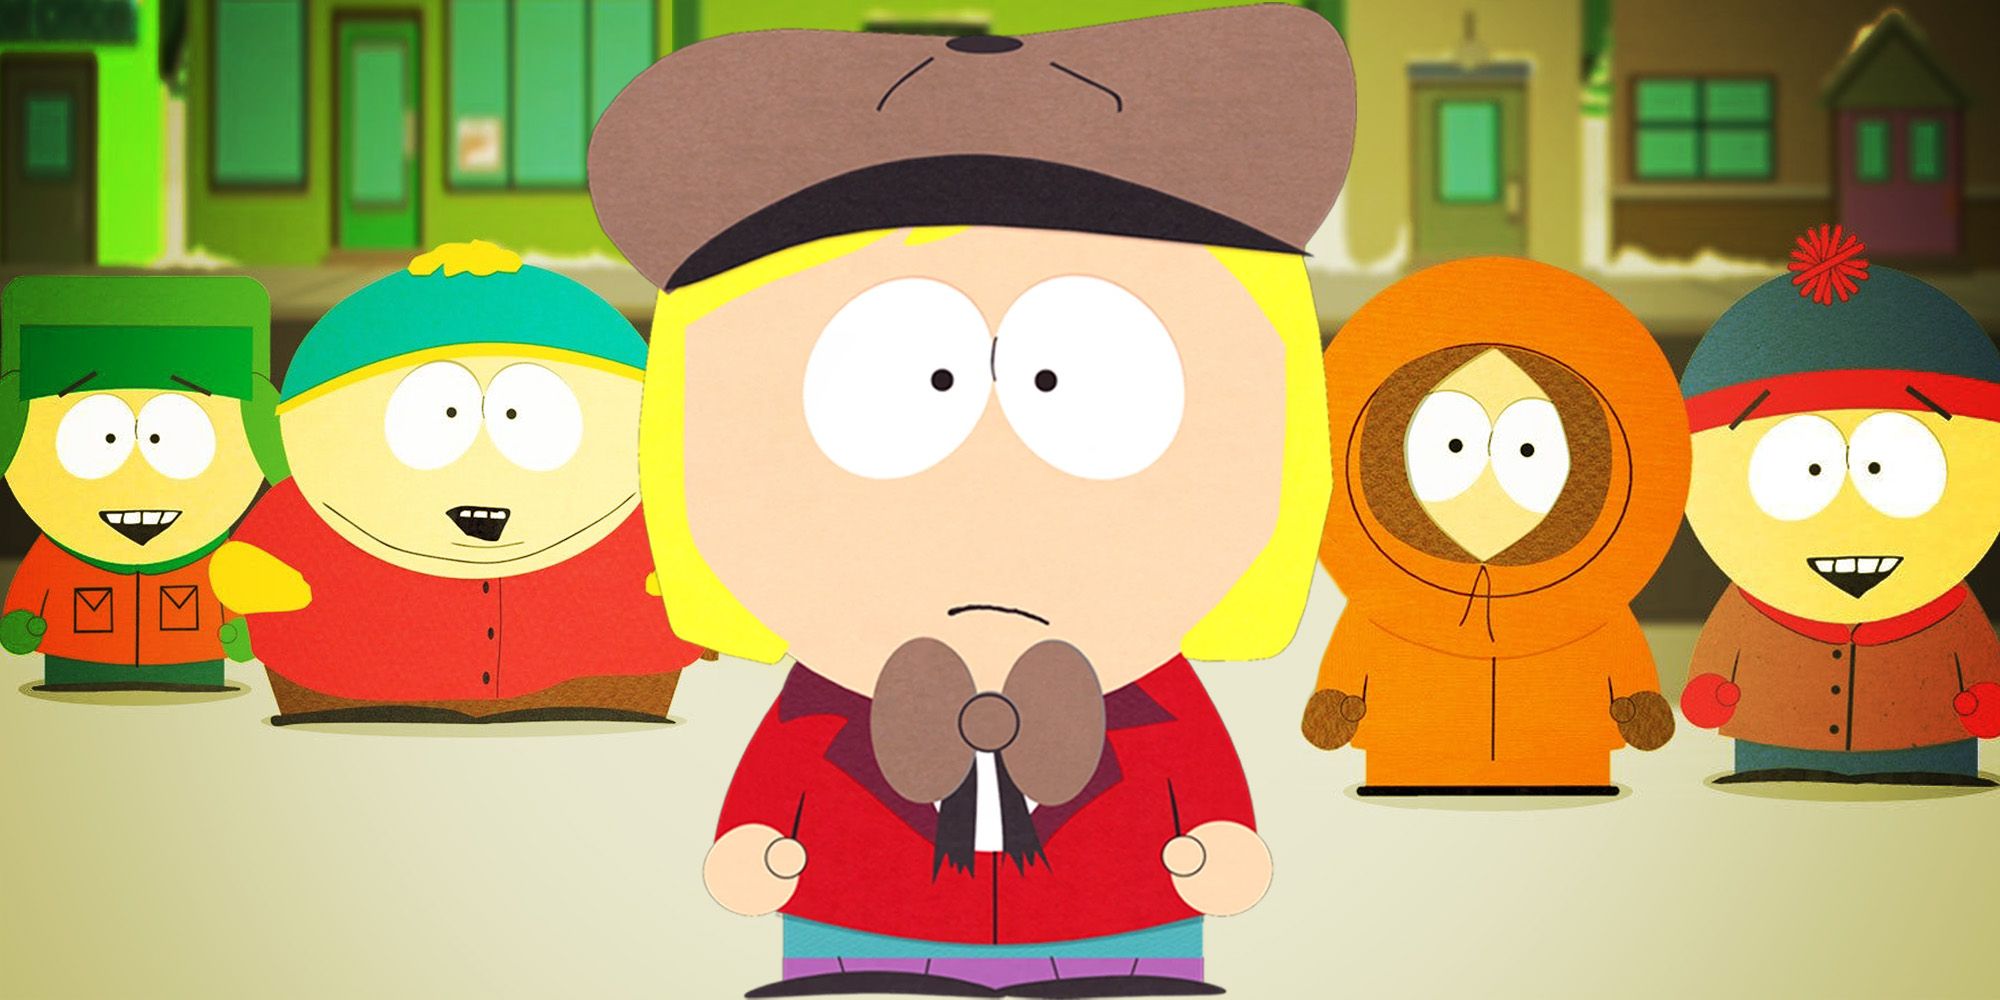 South Park Pip with Kyle, Eric, Kenny and Stan